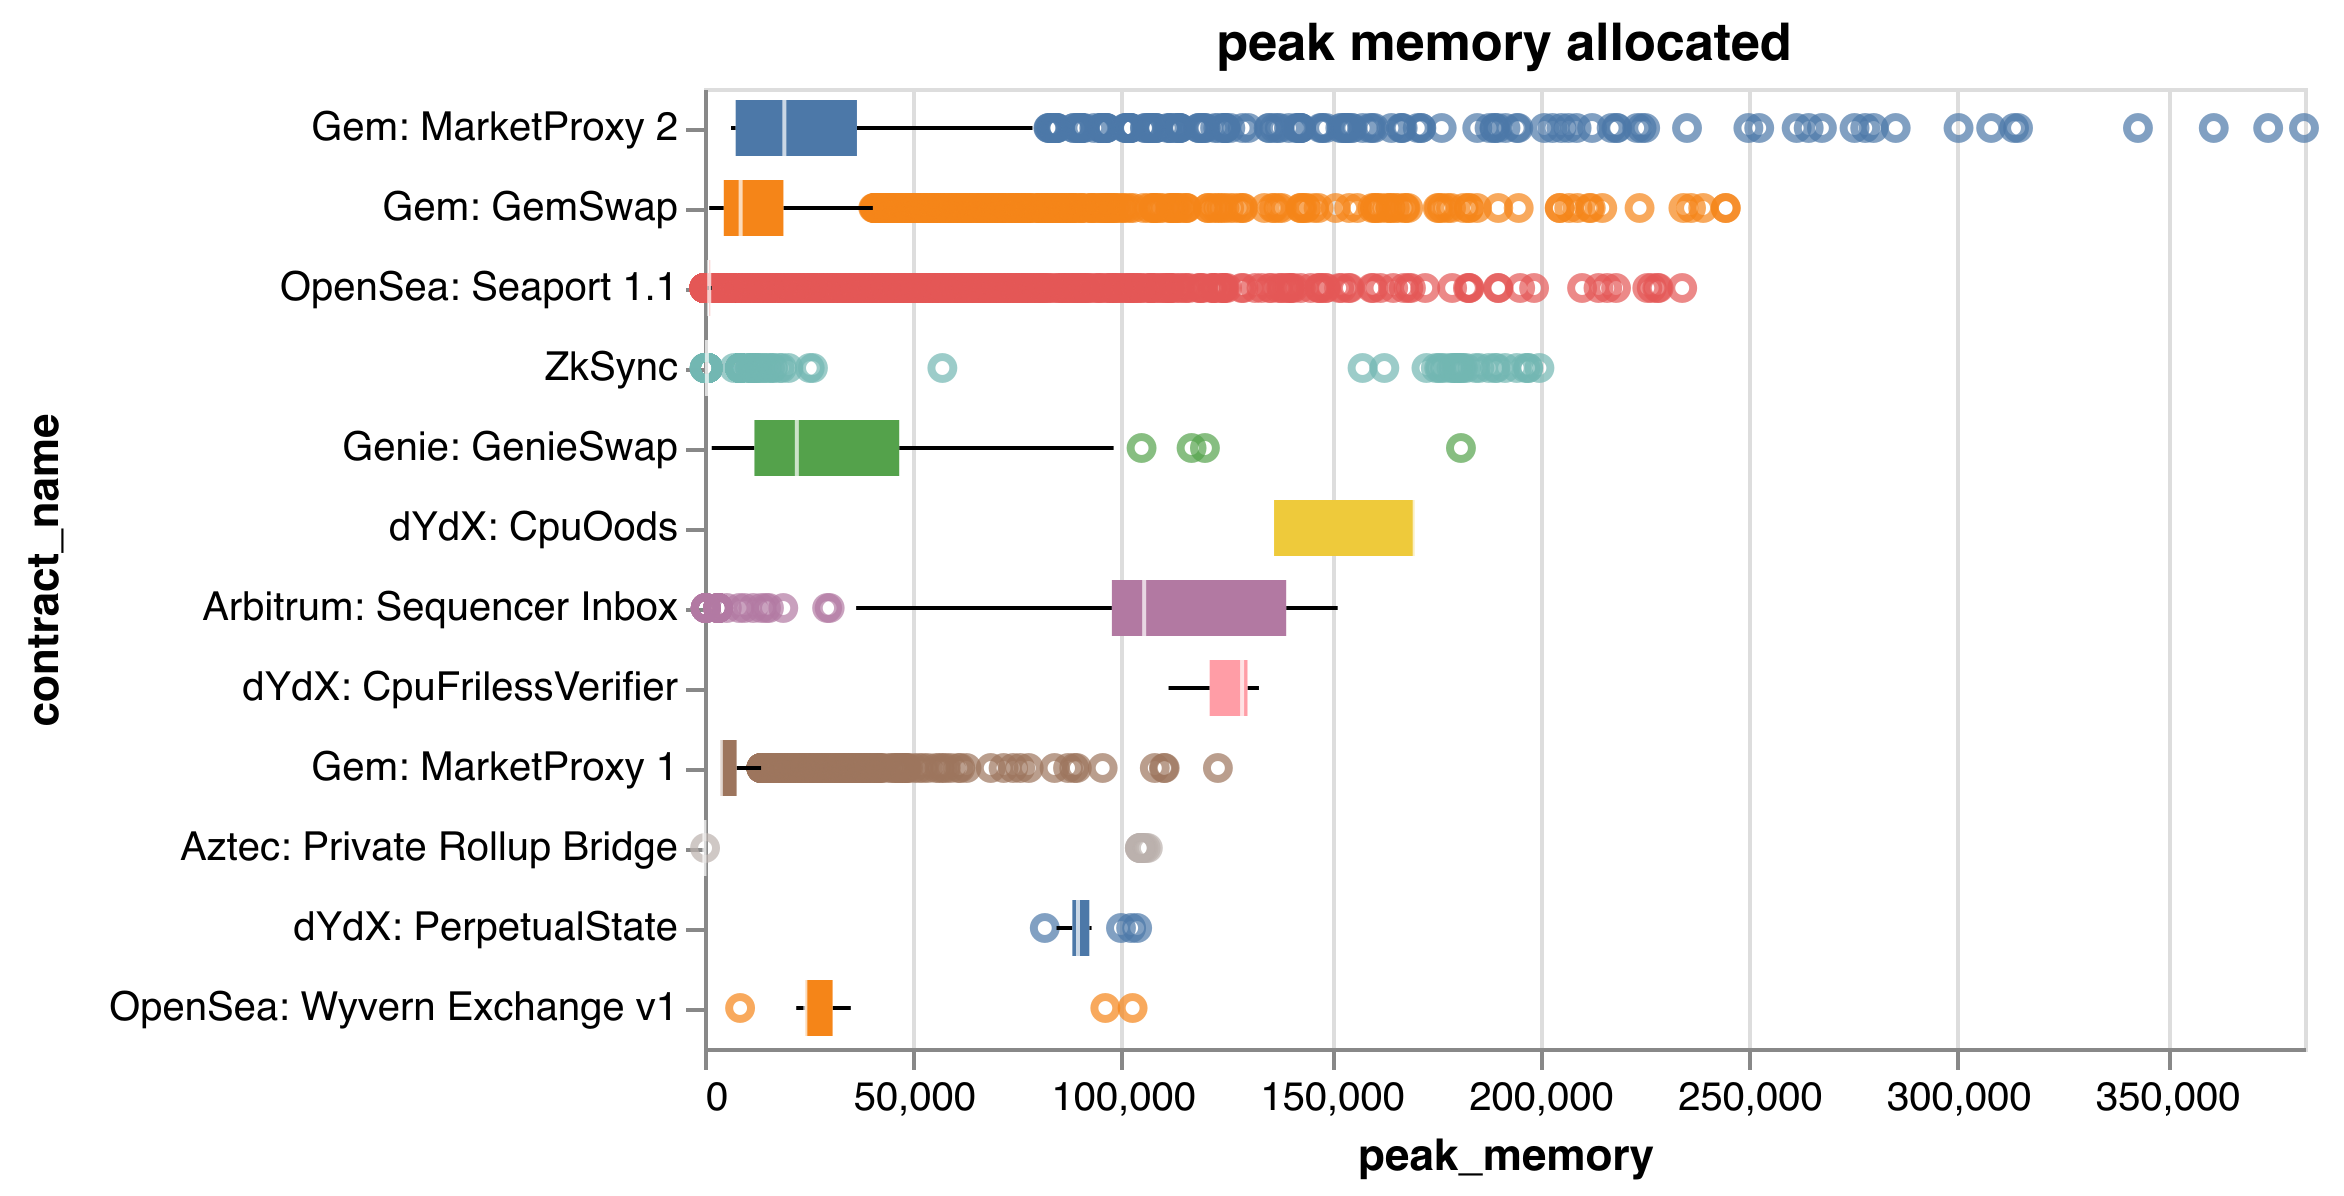 contracts with peak memory usage